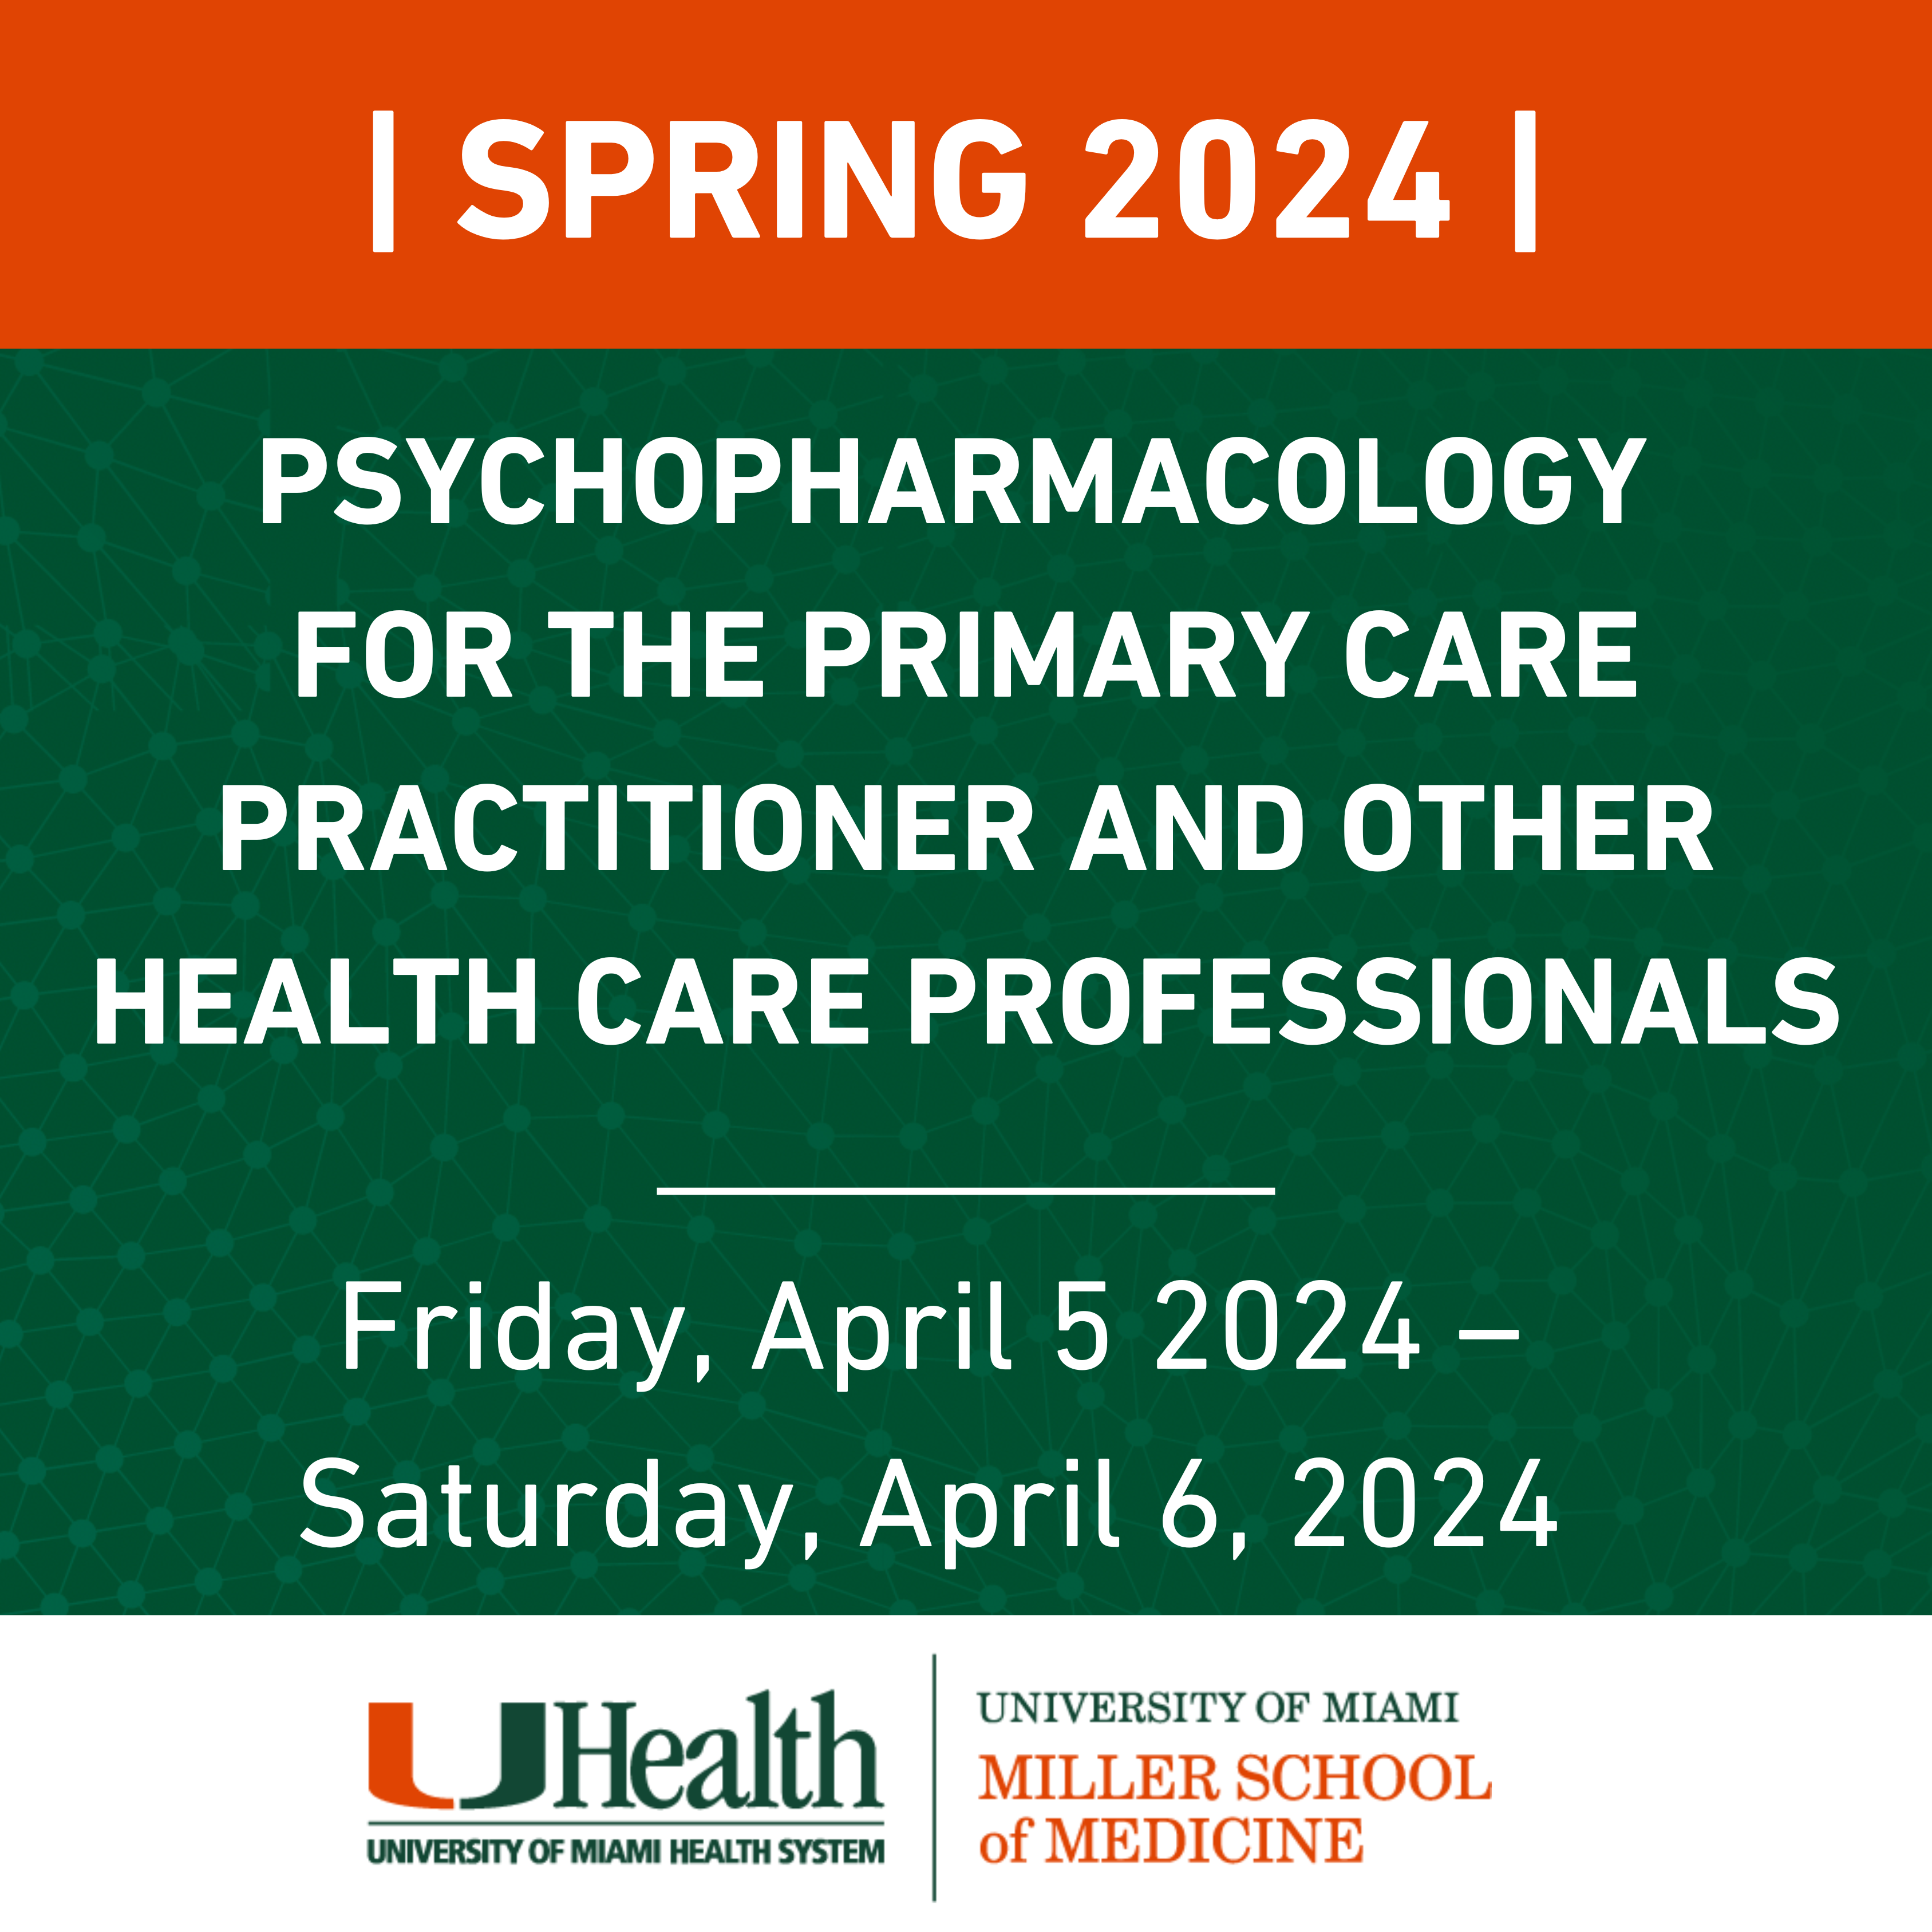 Psychopharmacology for the Primary Care Practitioner and Other Health Care Professionals